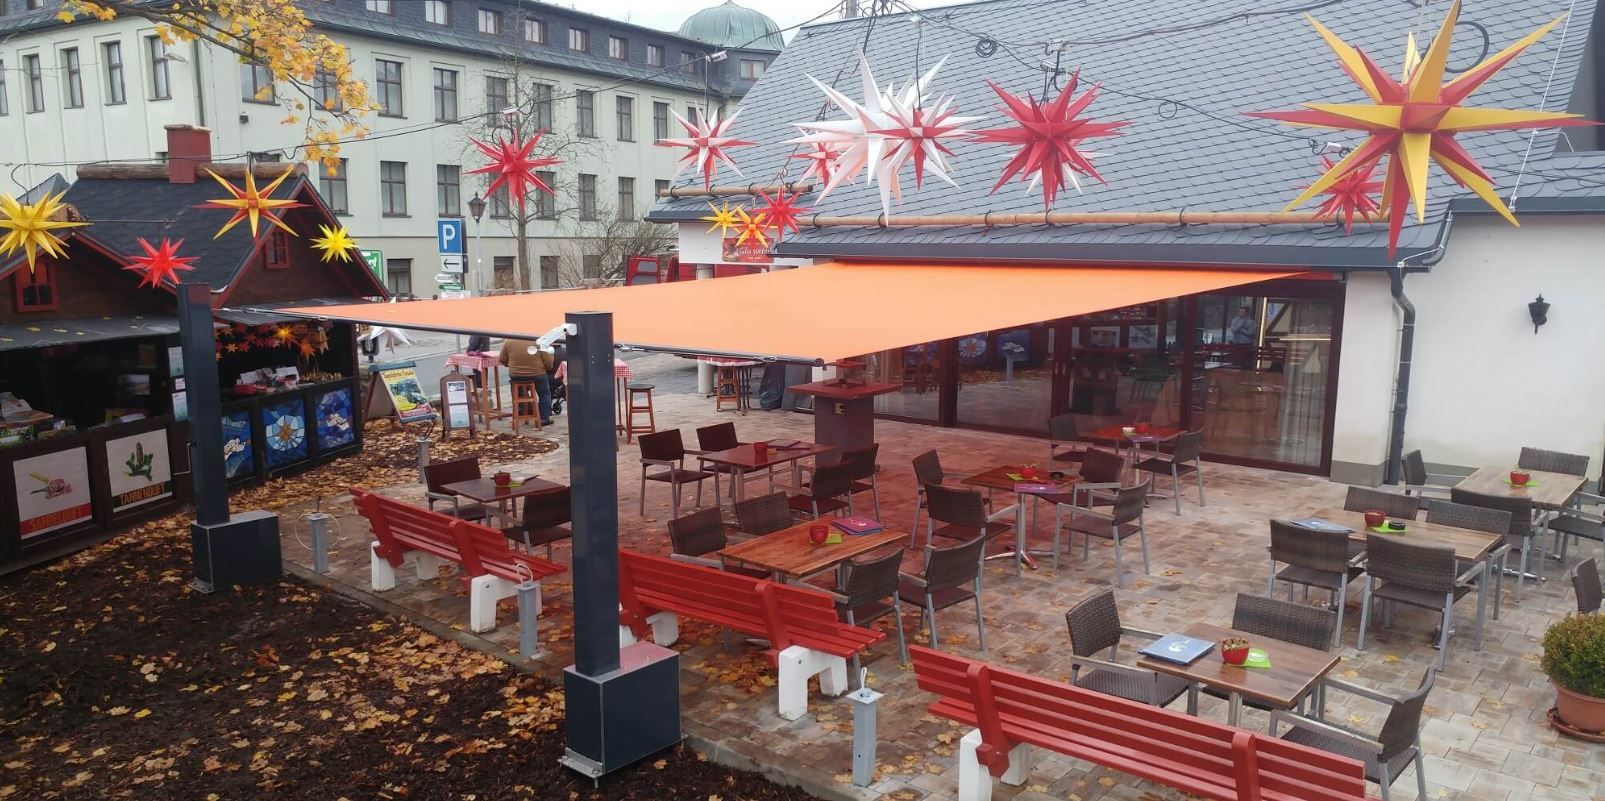 Commercial Awnings Retractable Pergola Roof Covers Nbsp Hamburg By Retractable Awnings